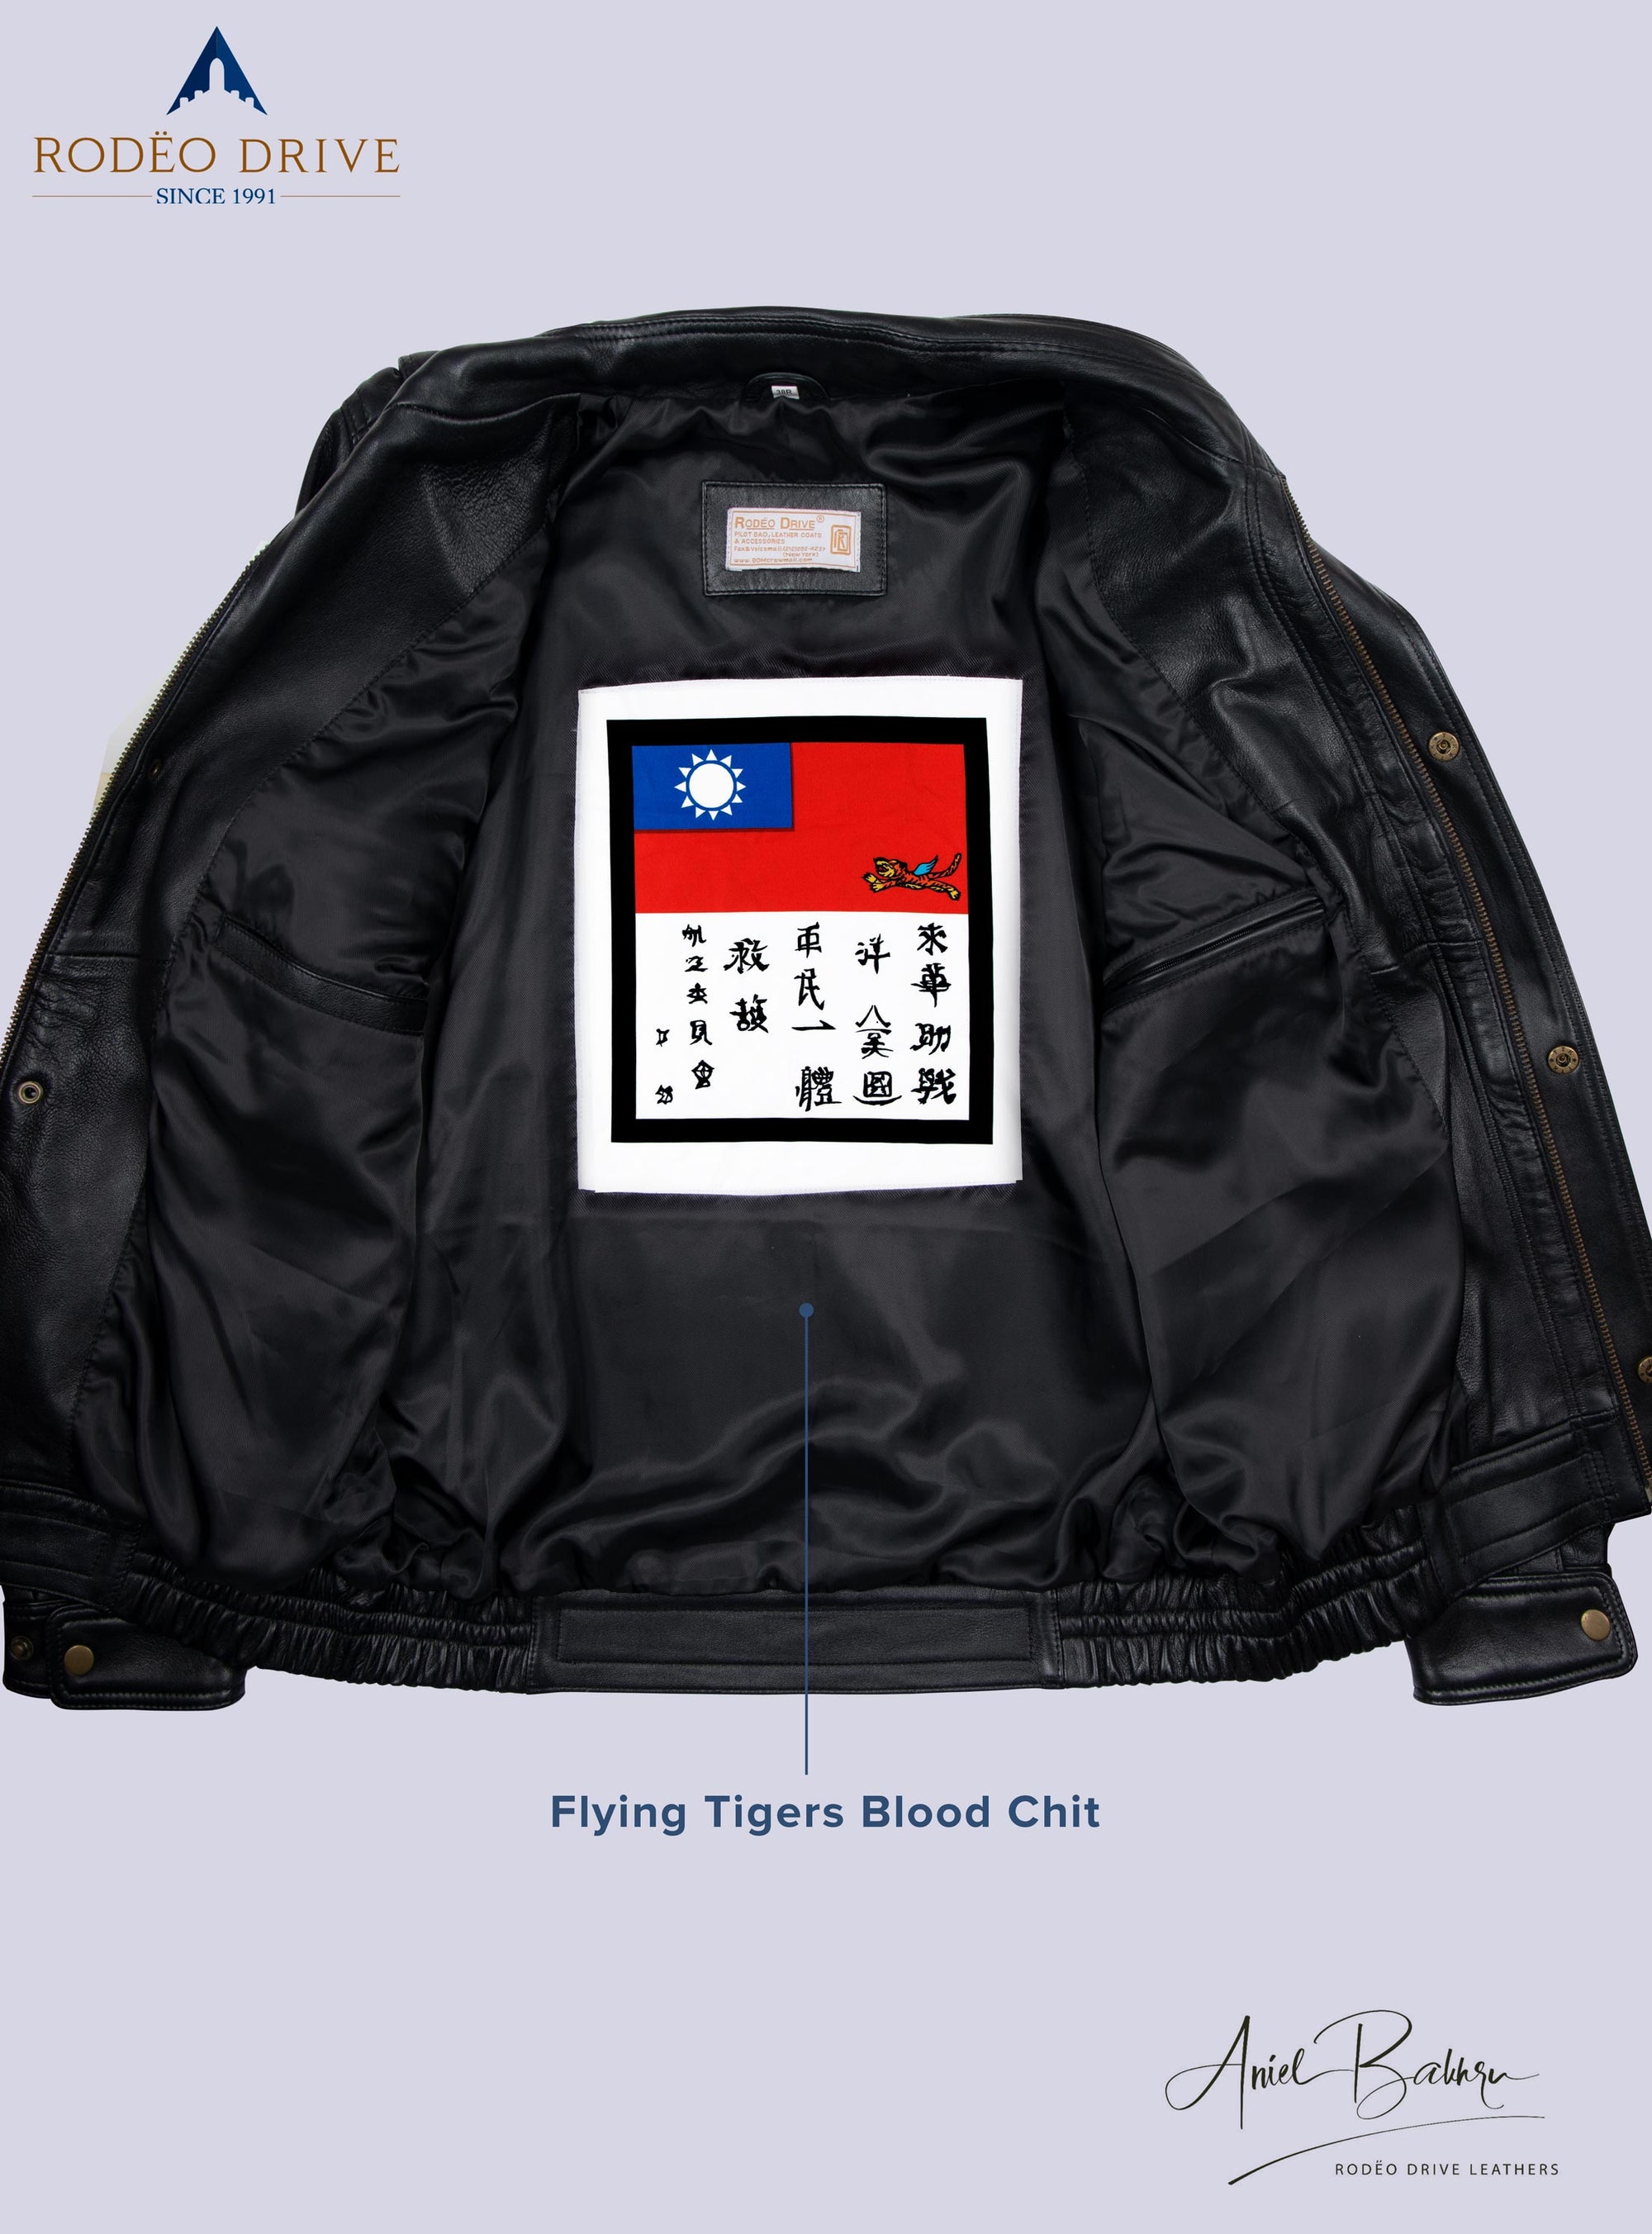 Image of inside part of Bomber Short jacket,  A Flying Tigers Blood Chiti sewed inside.